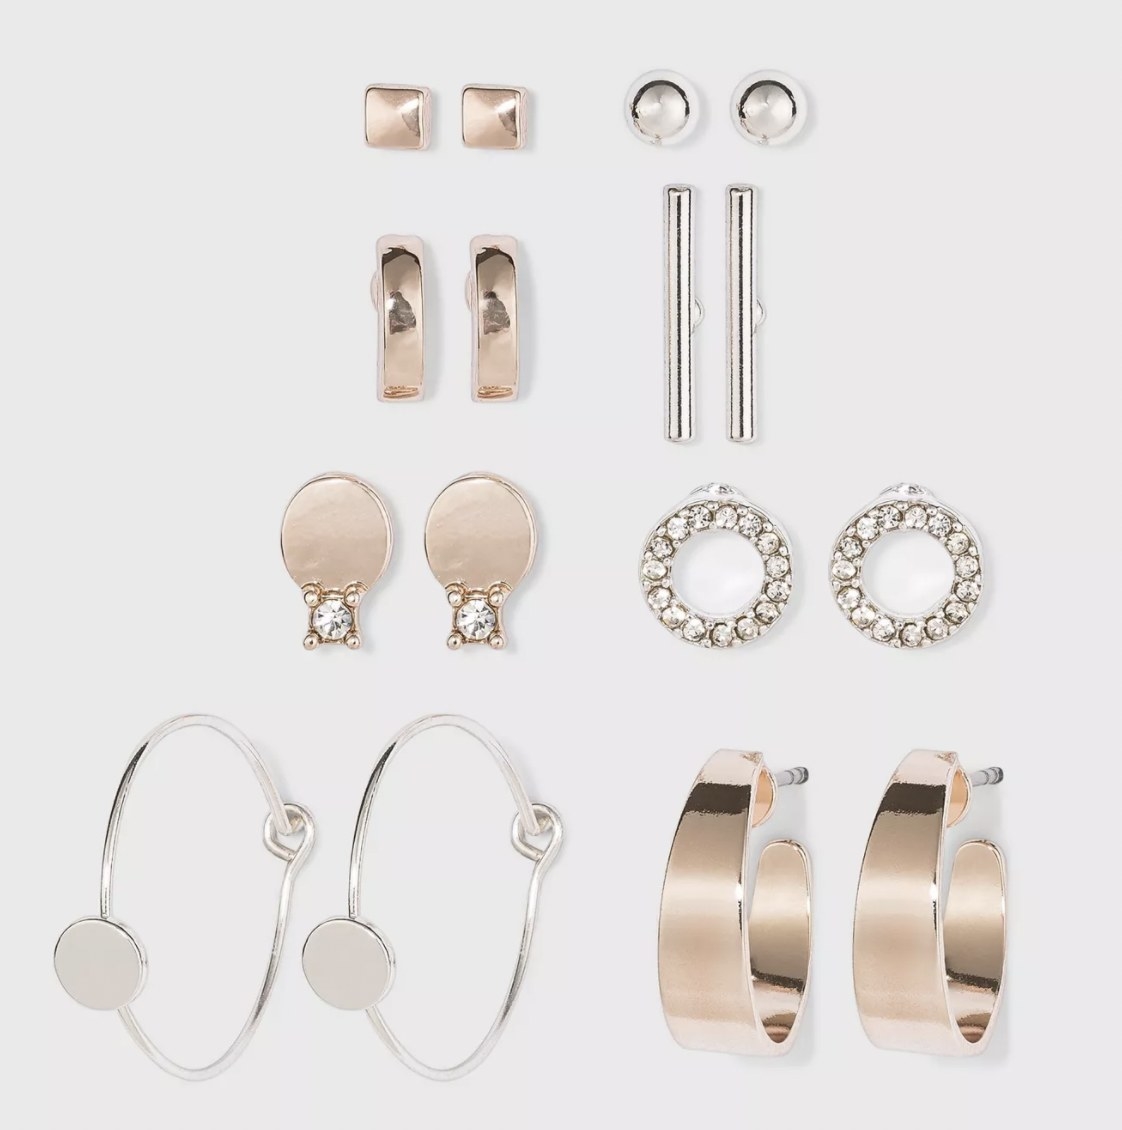 the full set if silver and rose gold stud and hoop earrings